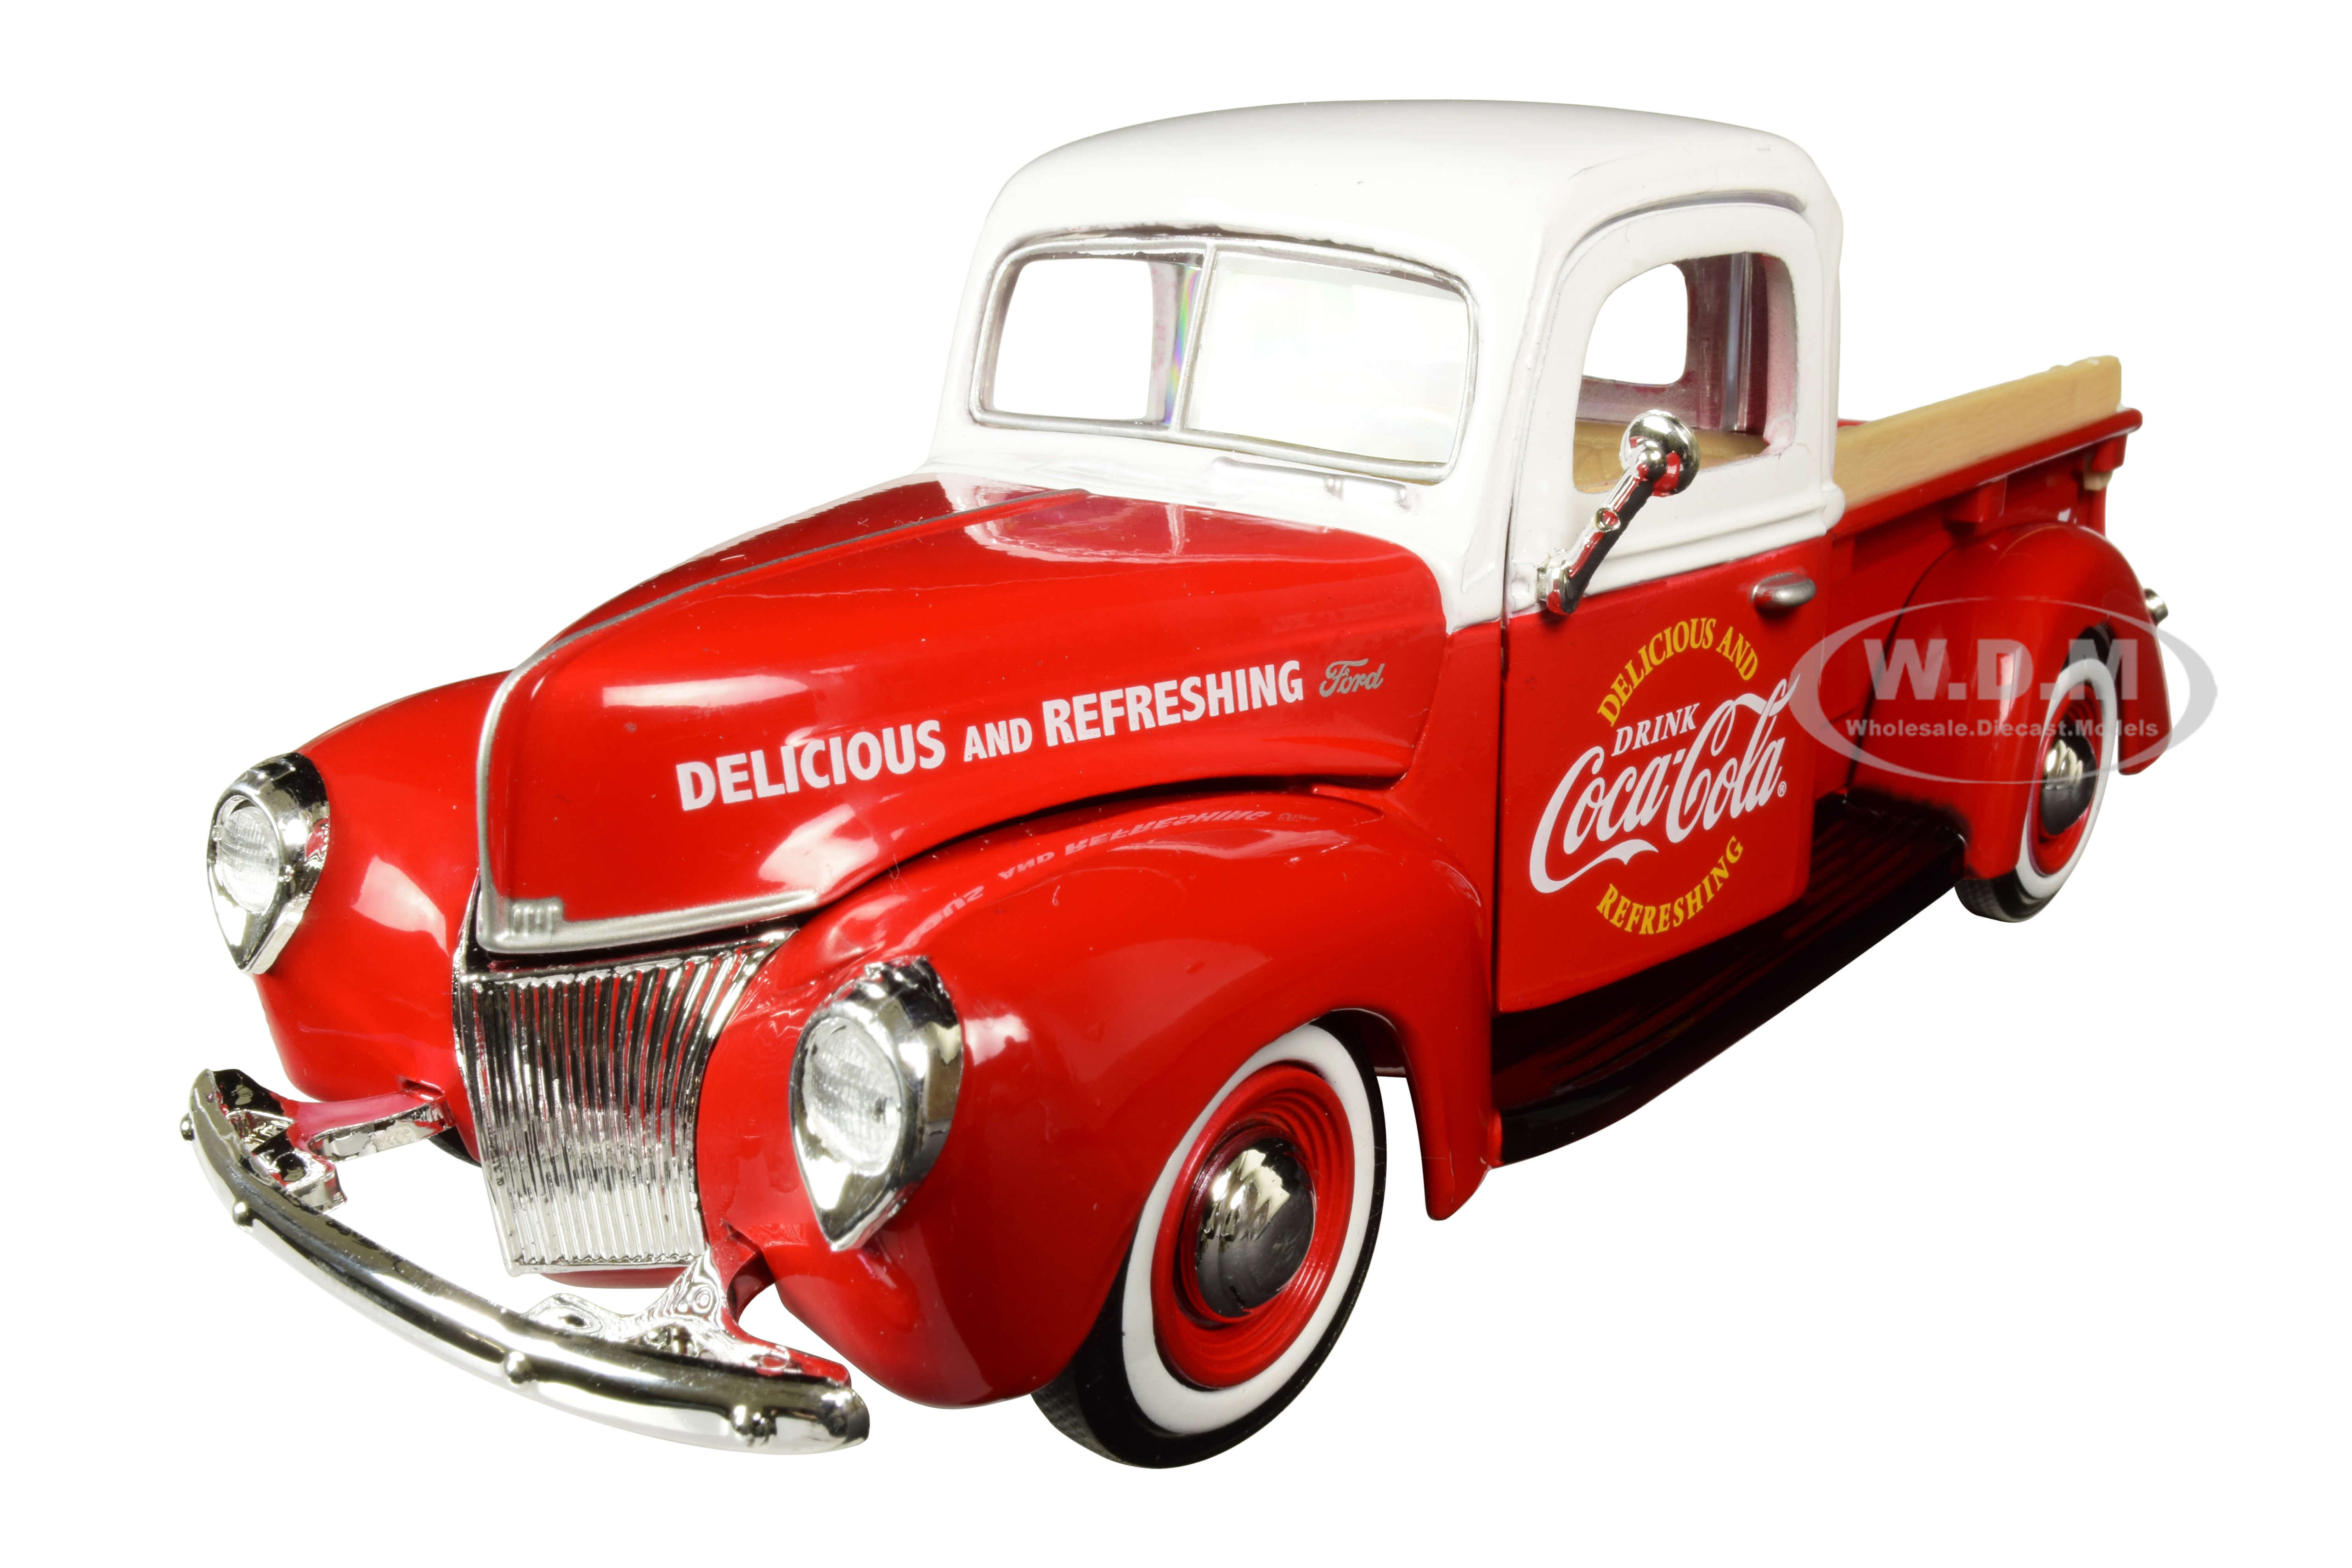 1940 Ford Pickup Truck "Coca-Cola" Red and White with "Coca-Cola" Cooler Accessory 1/24 Diecast Model Car by Motorcity Classics